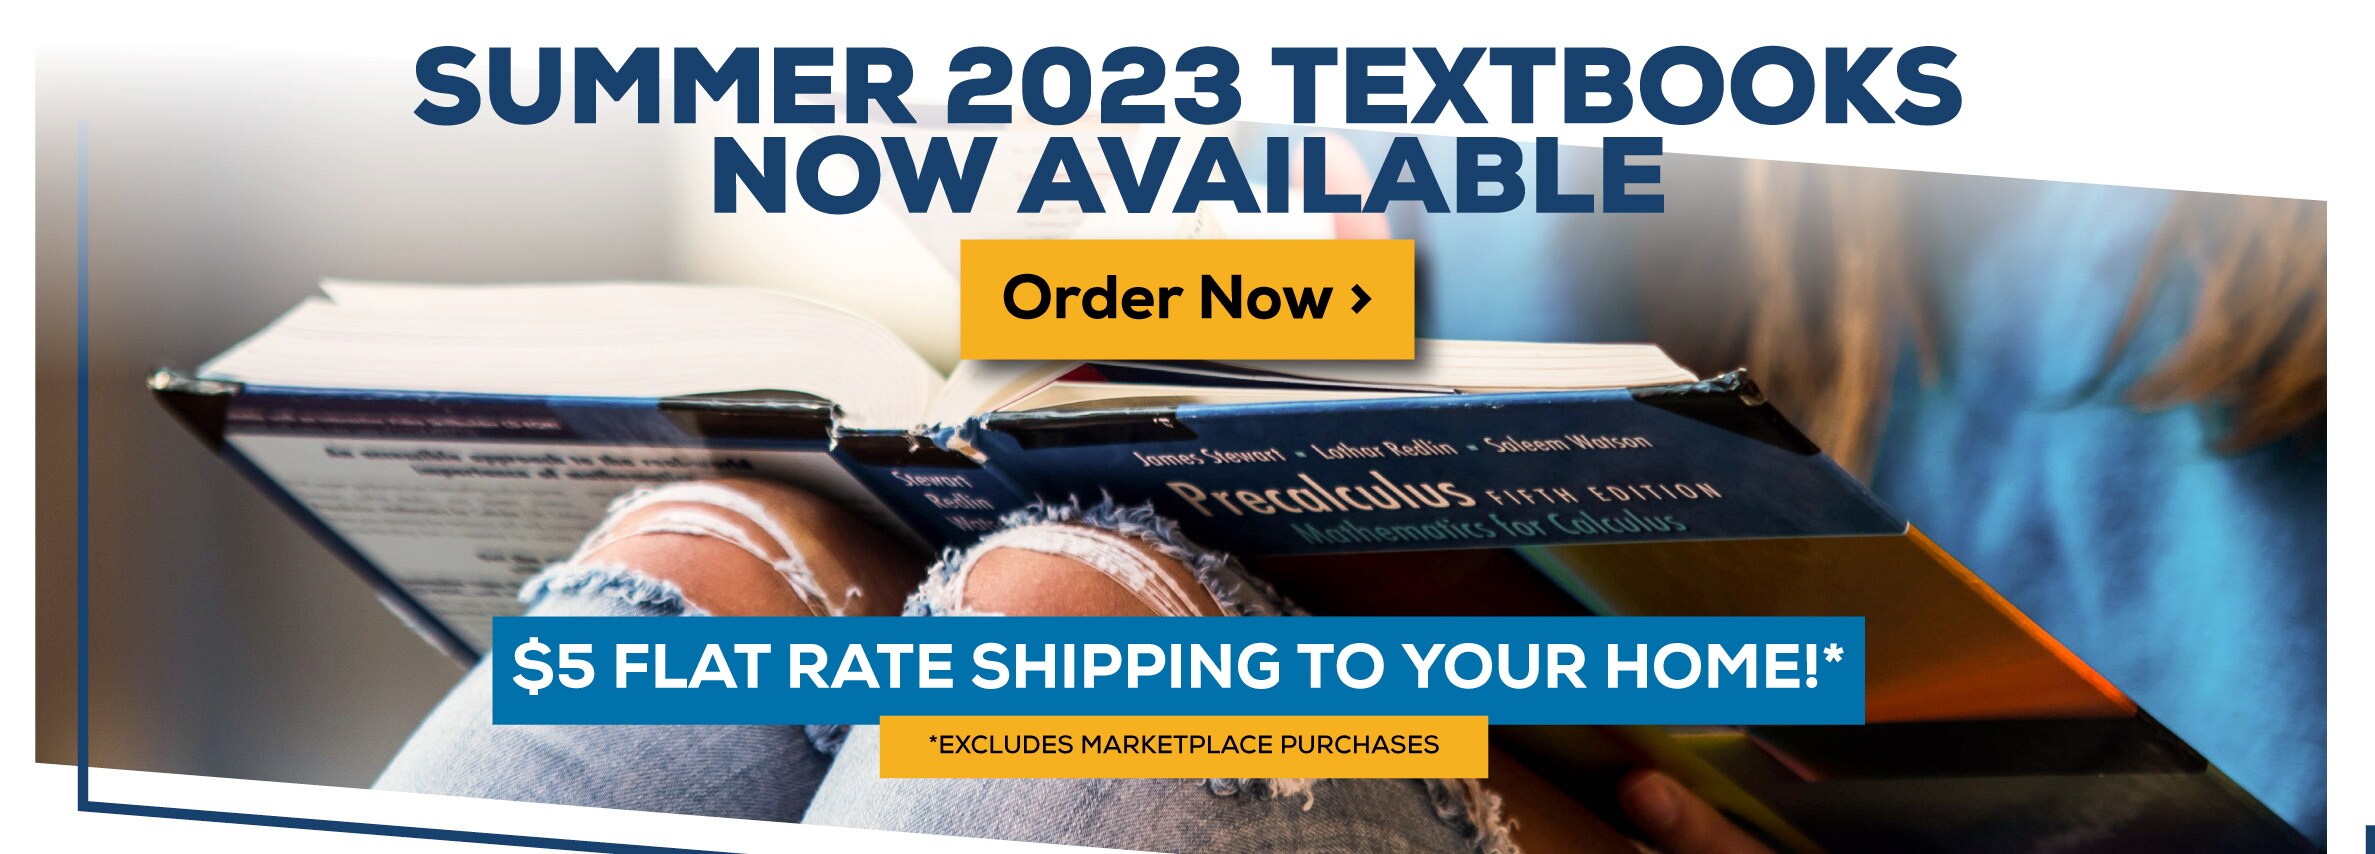 Summer 2023 Textbooks Now Available Order Now $5 Flat Rate Shipping to Your Home!* Excludes Marketplace Purchases